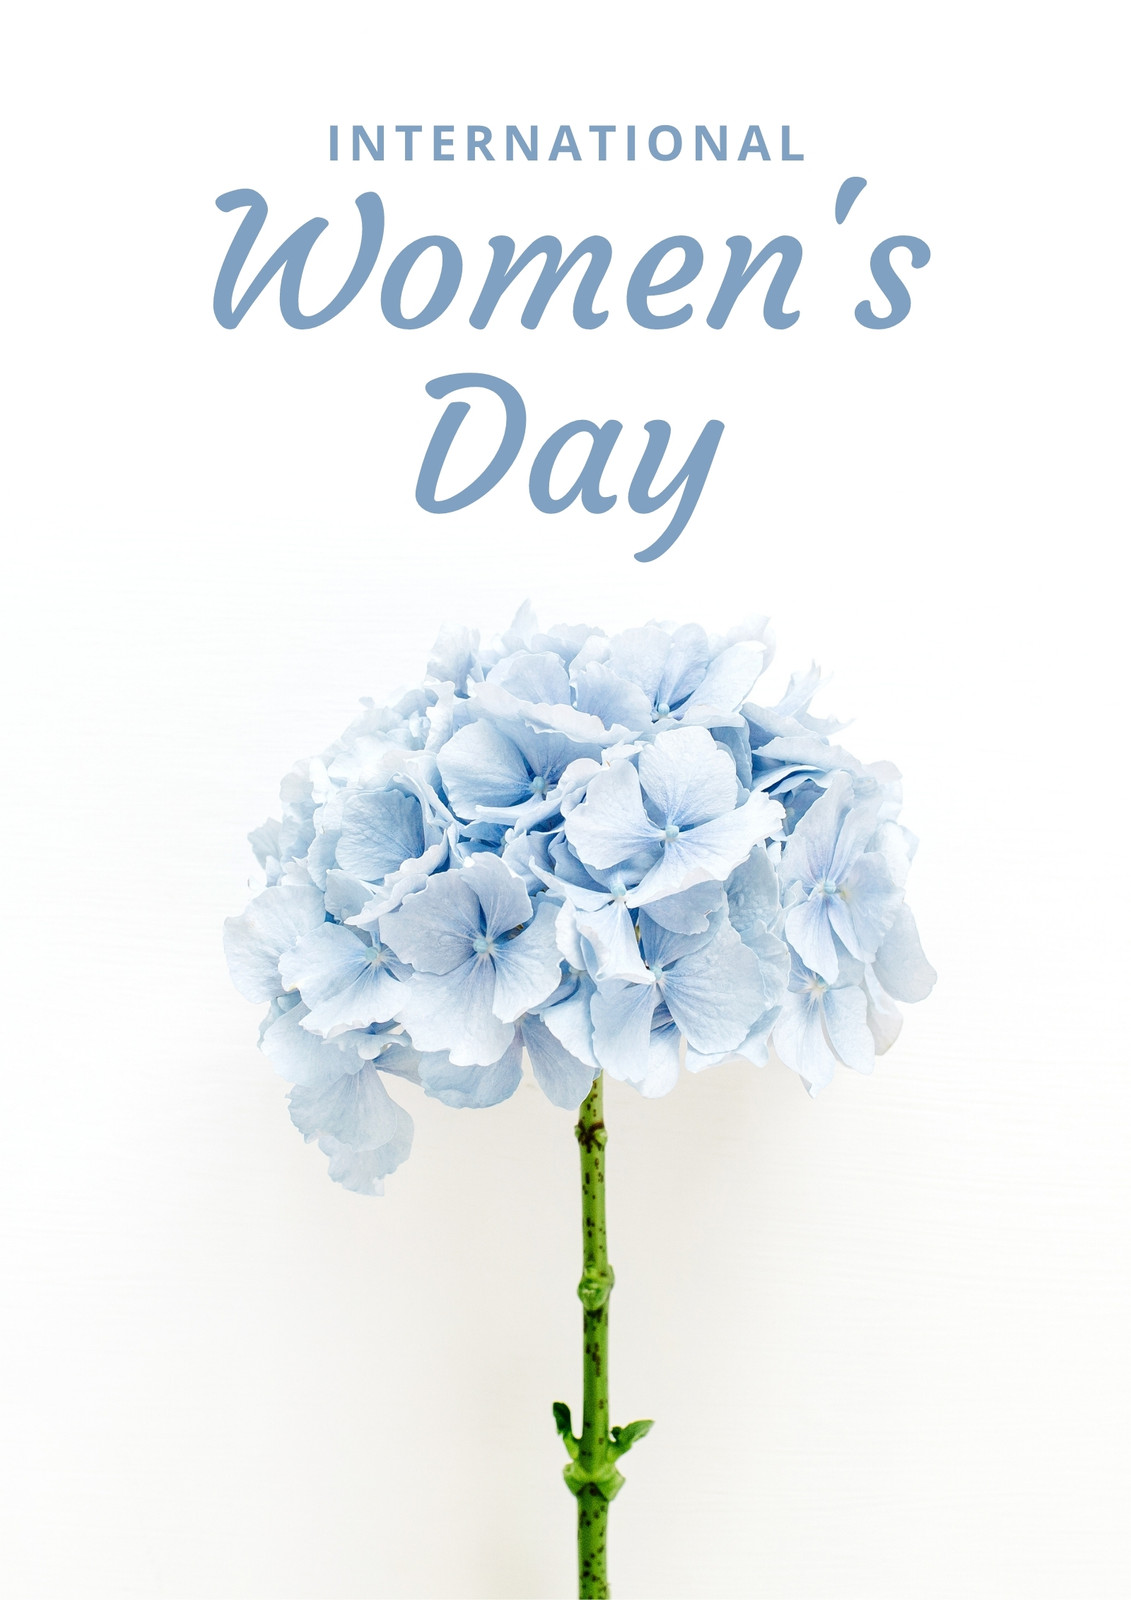 Free custom printable women's rights poster templates | Canva